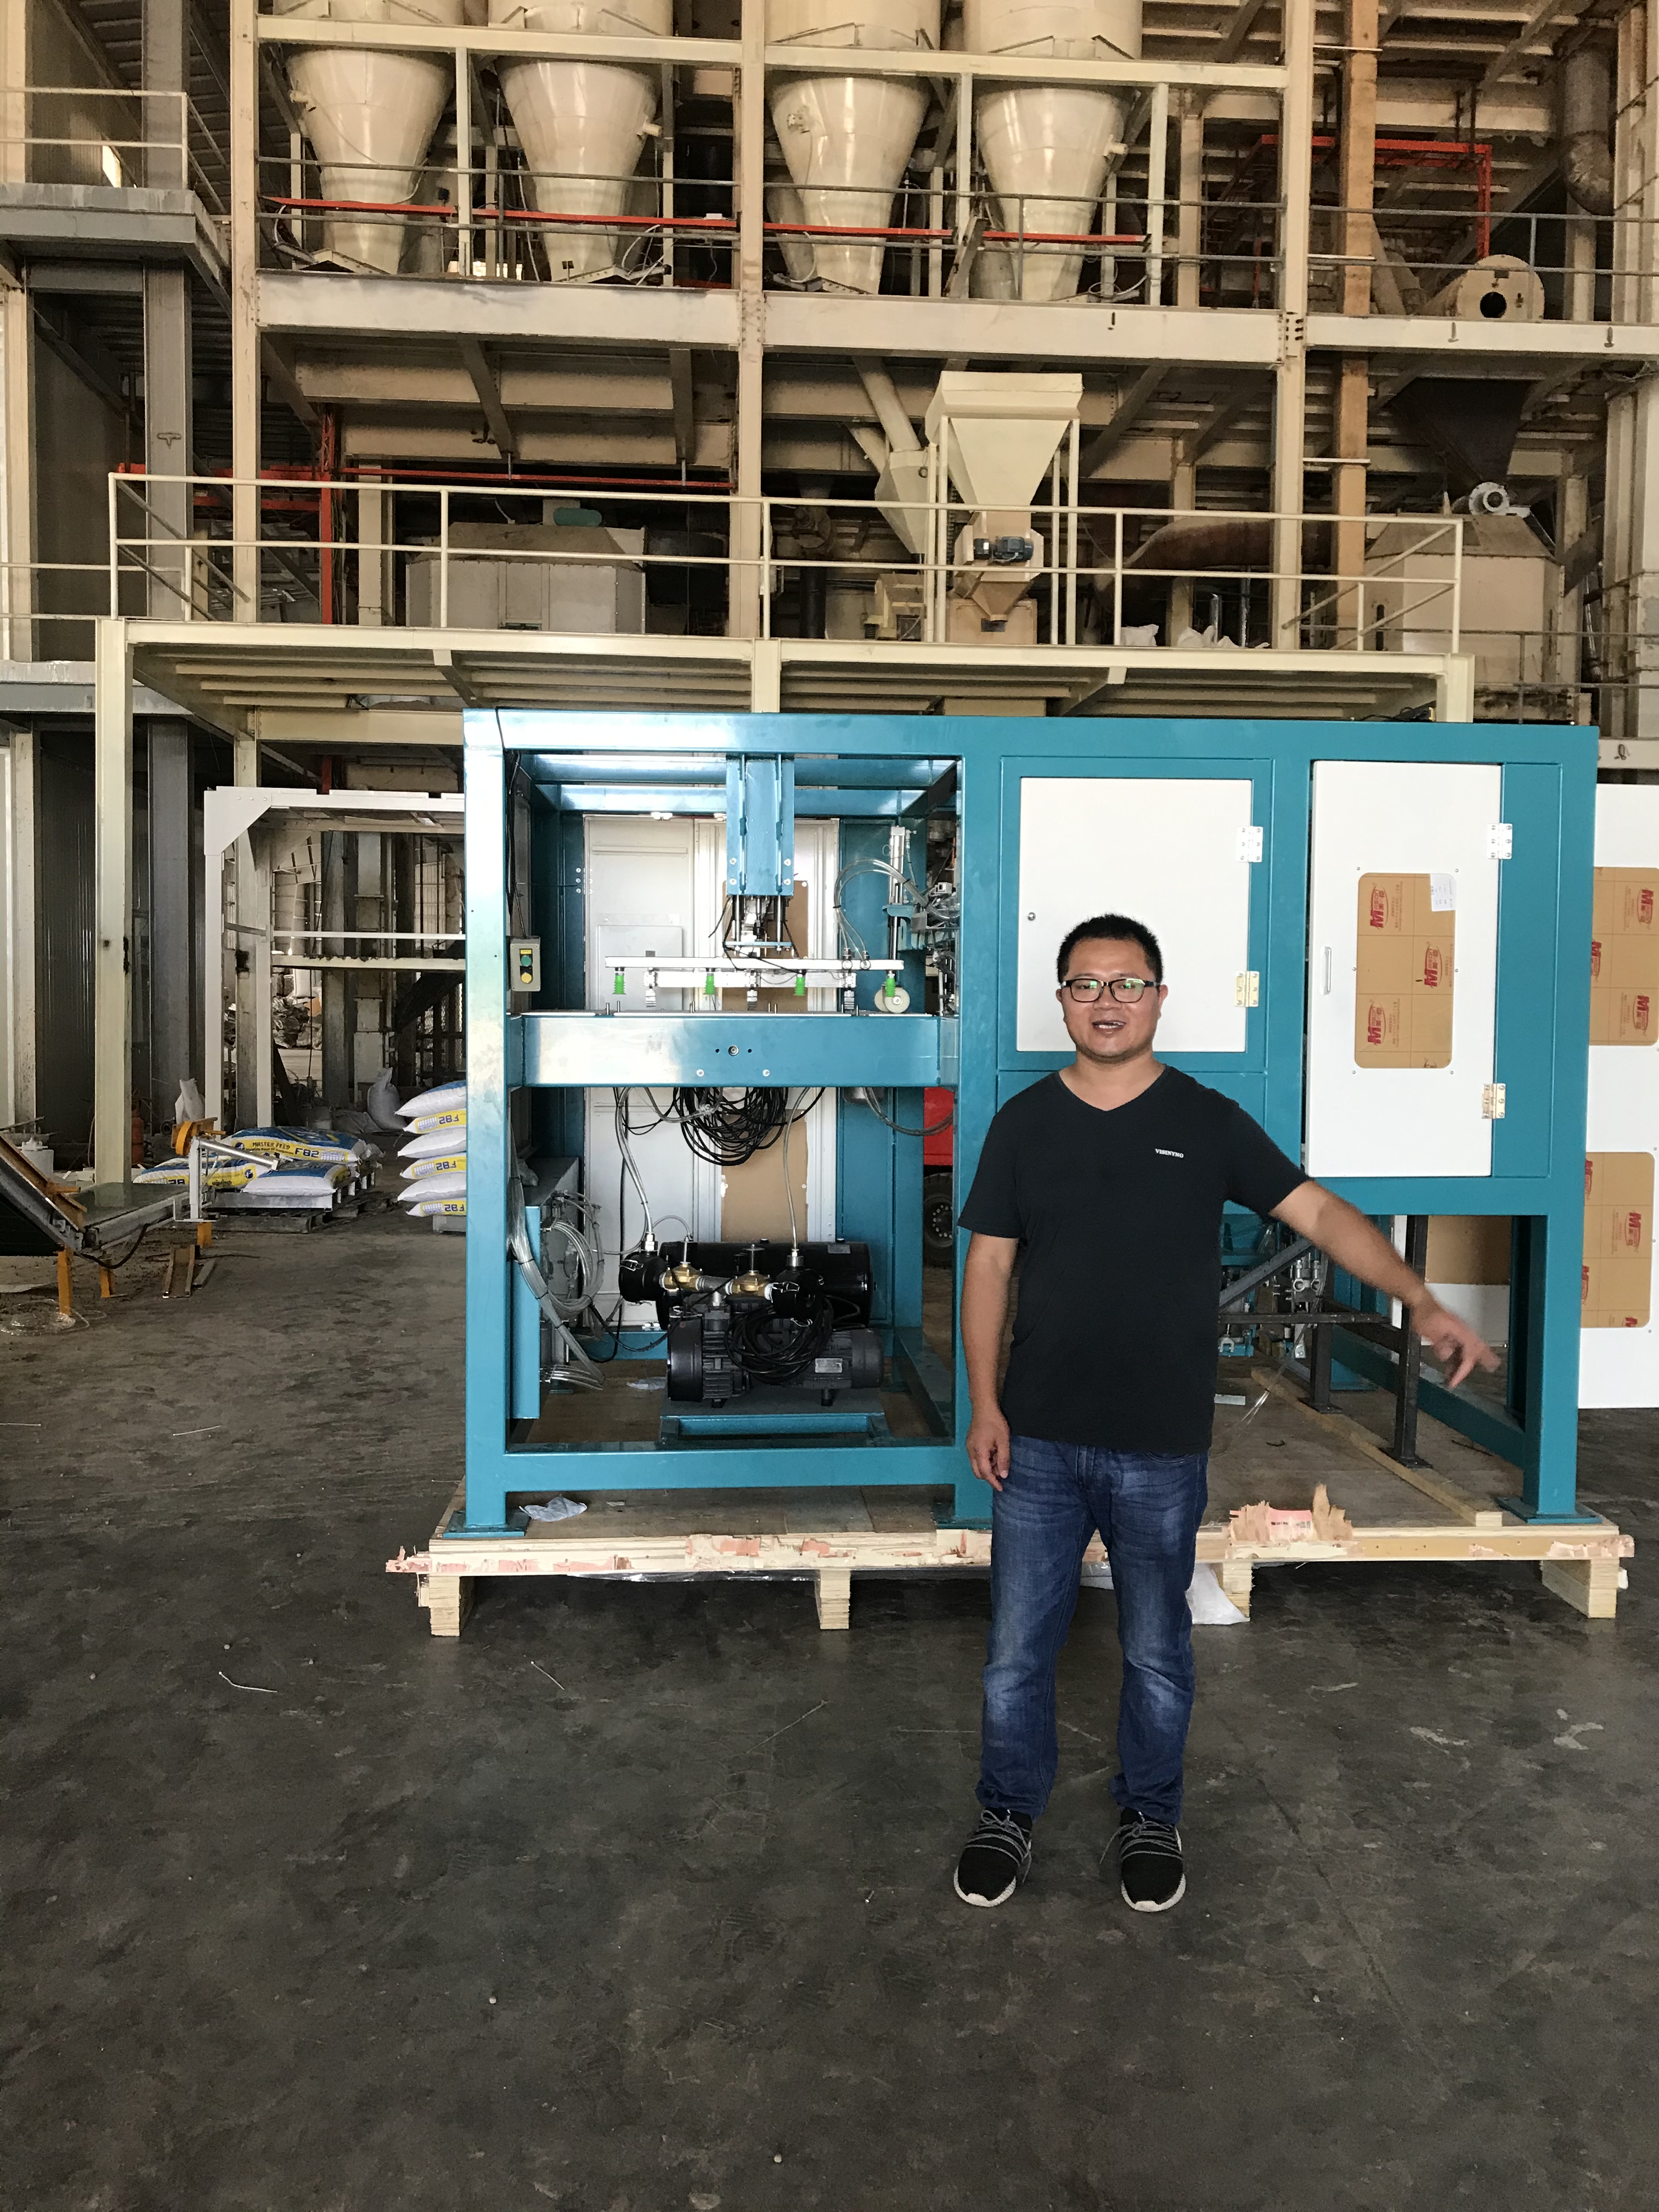 packing machine Meals and Stock Feeds bagging machine Grains bagging machine Whole Grains packing machine fully Automatic Packing Palletizing Line, Fully Automatic Packing Line, Fully Automatic Baggin